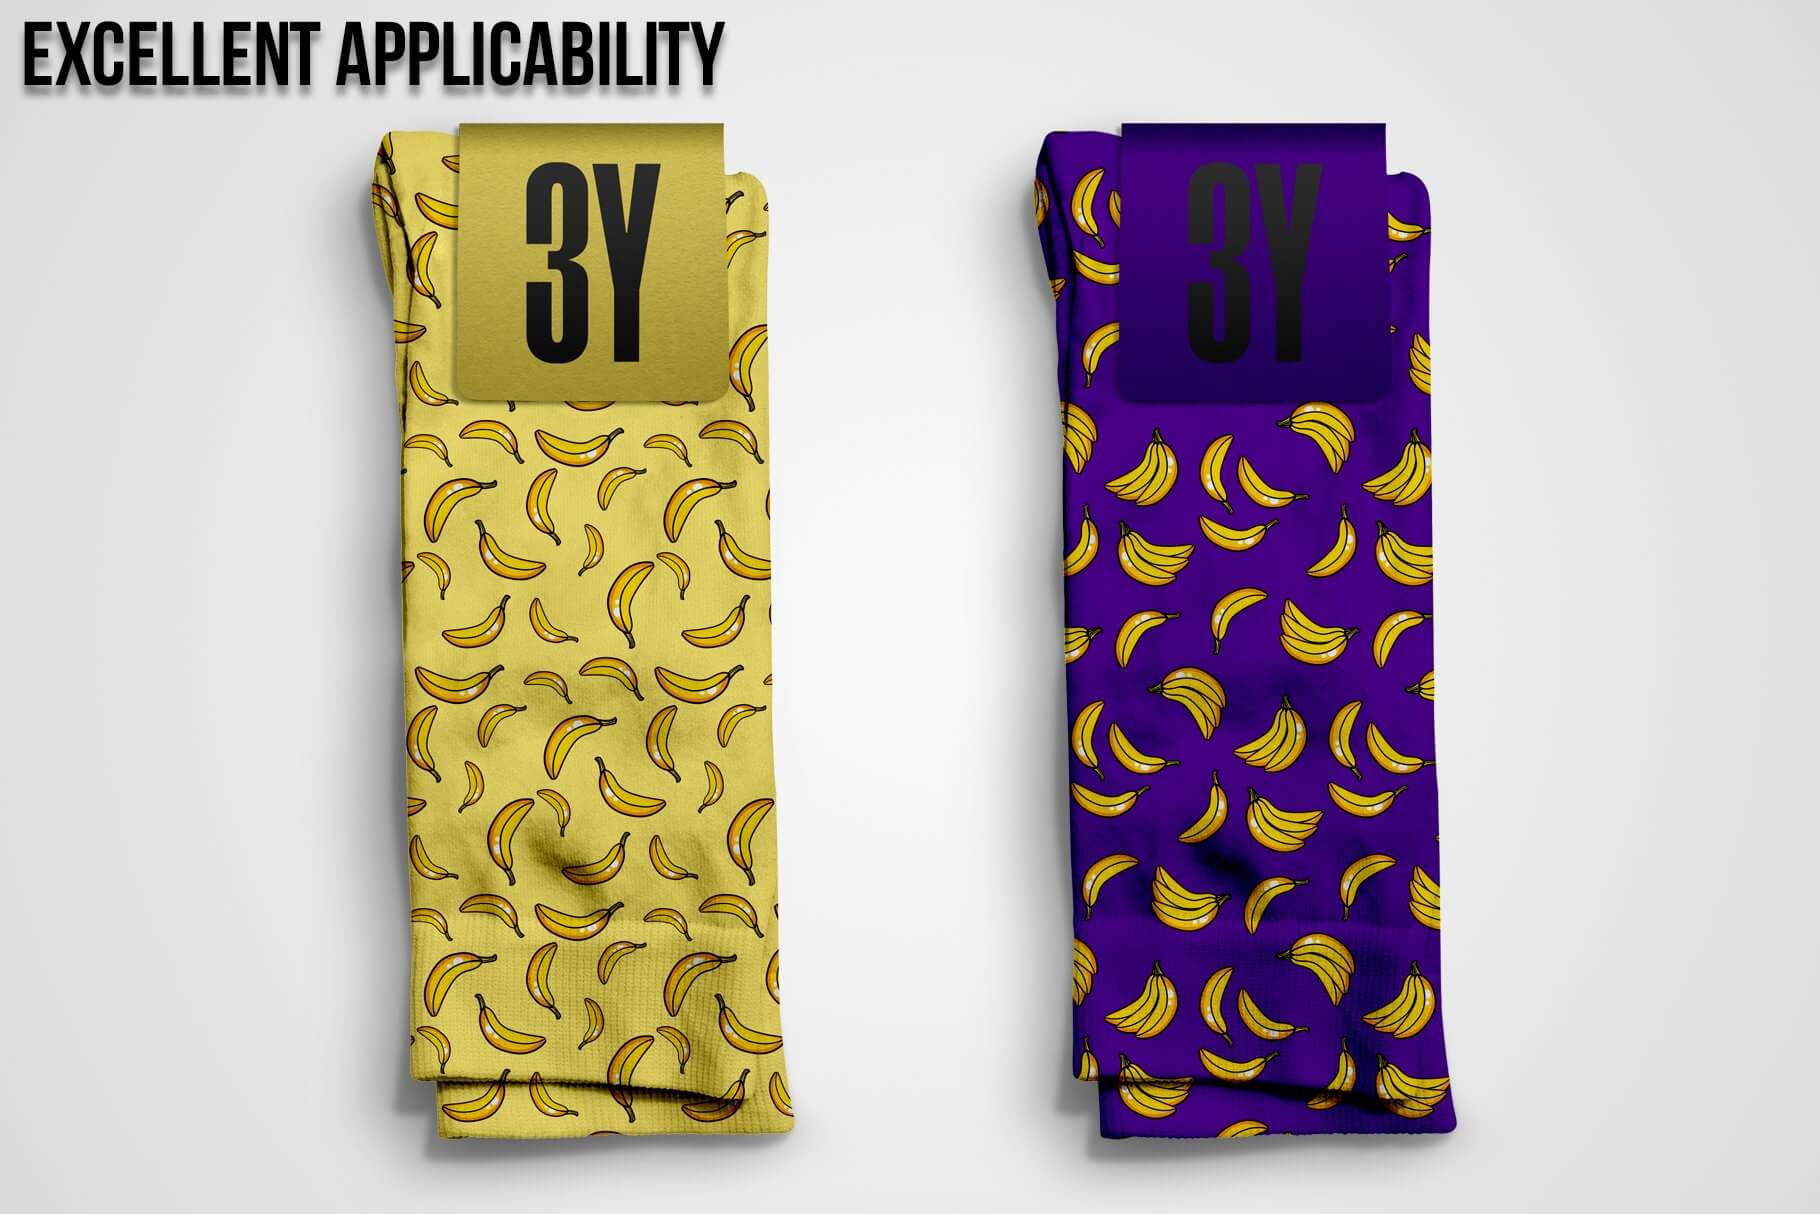 Socks with the image of bananas on yellow and purple backgrounds.